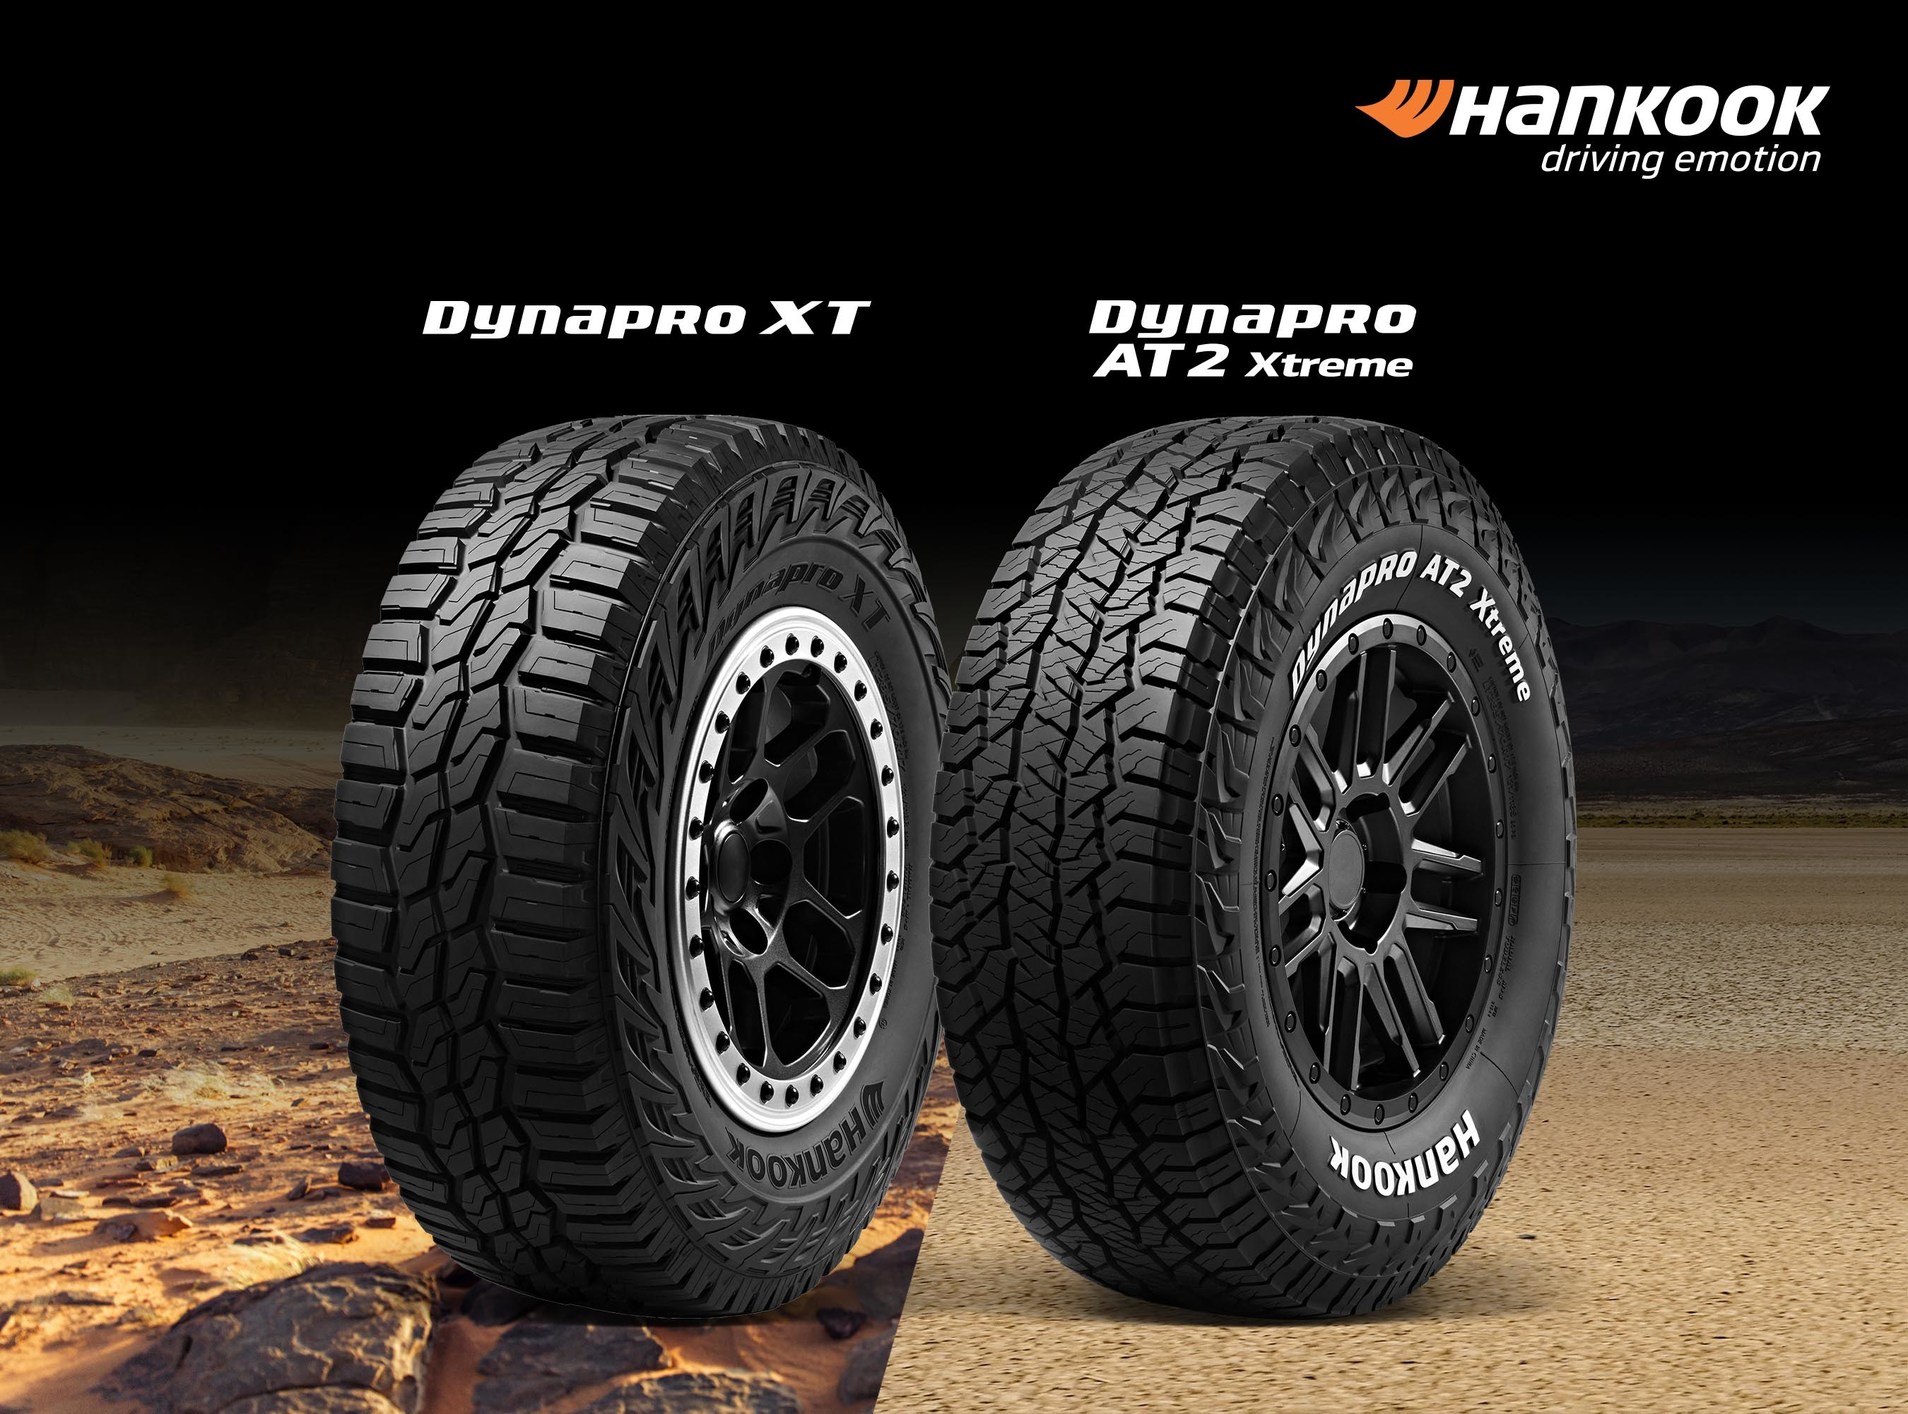 Are Hankook Tires Reliable